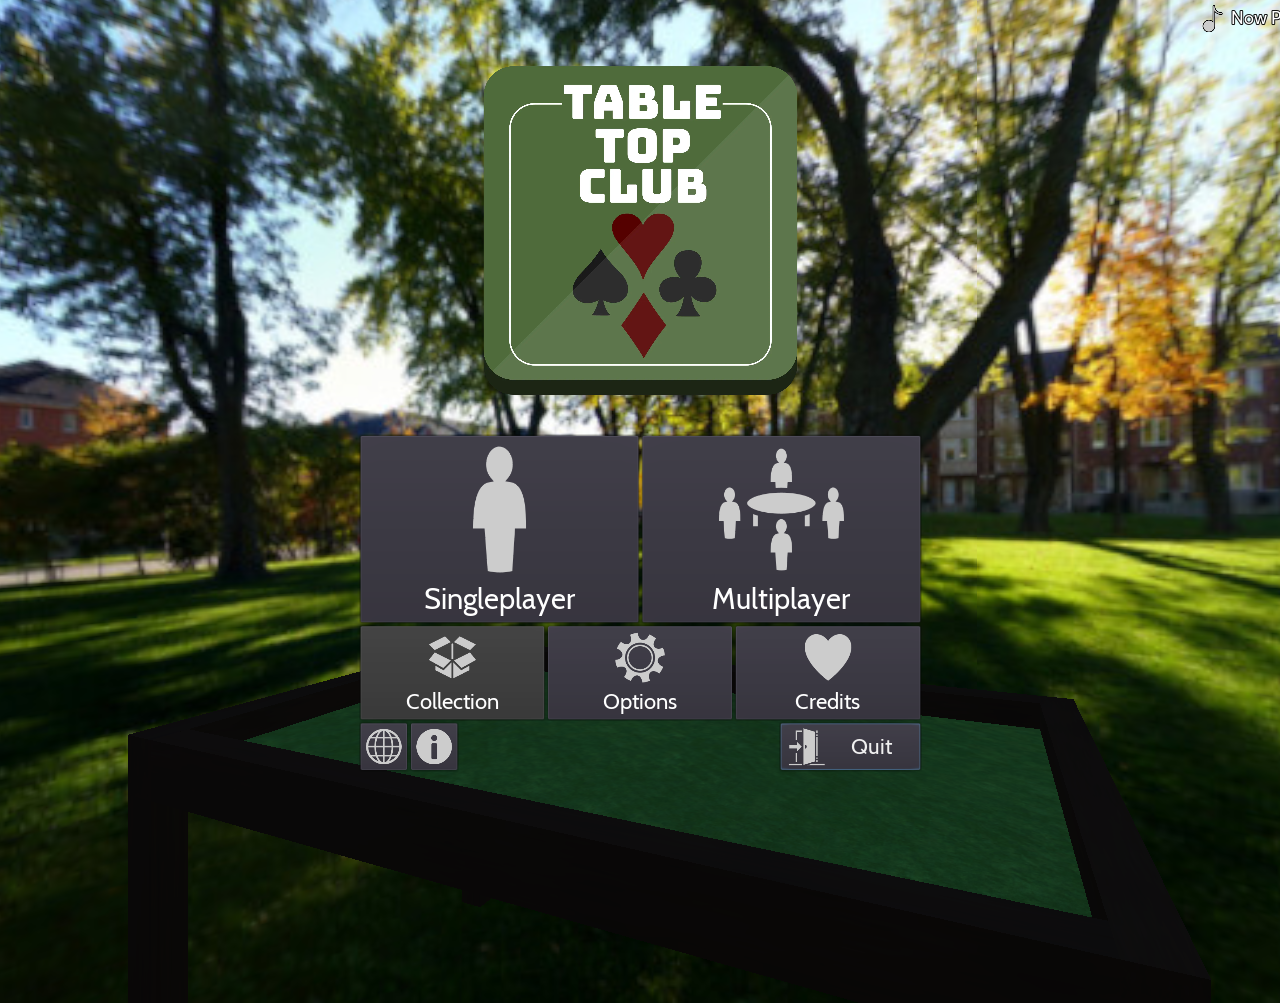 The revamped main menu for Tabletop Club v0.2.0 - the background is of a park surrounded by houses, with the logo at the top of the screen. The buttons now have icons, and they have been put into rows. The first and biggest row contains the Singleplayer and Multiplayer buttons. The second middle-sized row contains the Collection, Options, and Credits buttons. The last and smallest row contains icon-only buttons for links, information, and to quit the game.